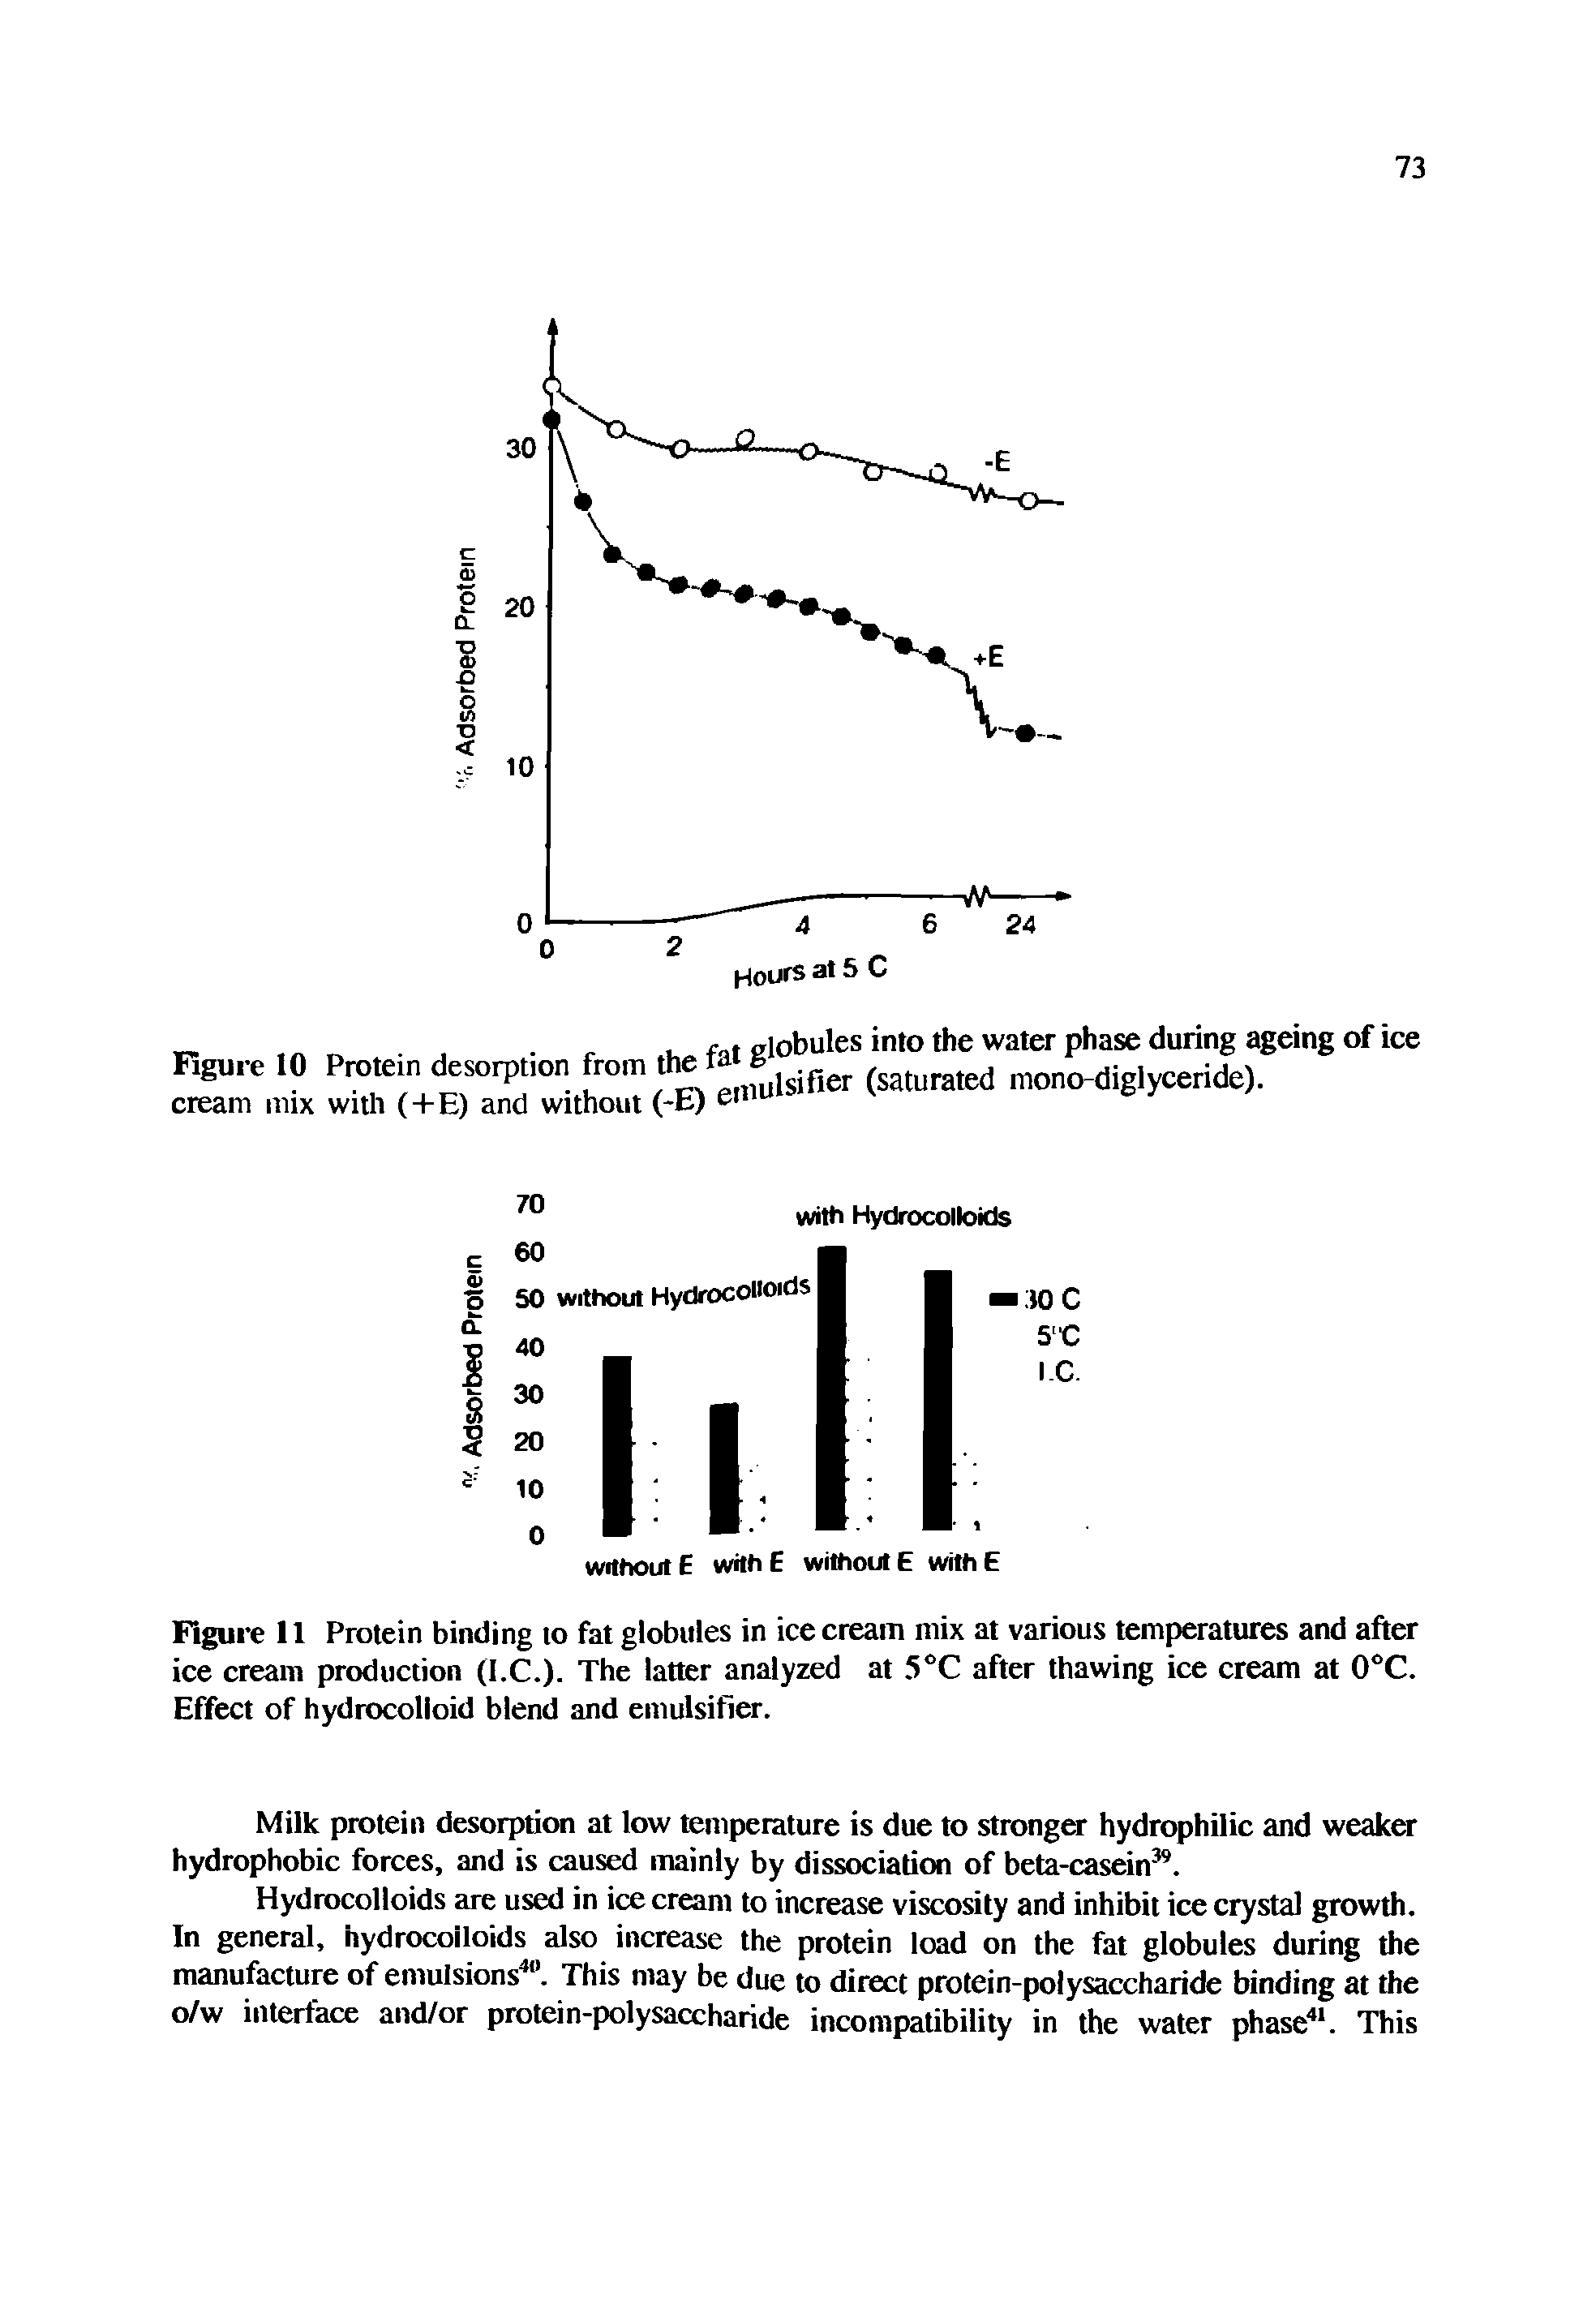 Figure 11 Protein binding to fat globules in ice cream mix at various temperatures and after ice cream production (I.C.). The latter analyzed at 5°C after thawing ice cream at 0°C. Effect of hydrocolioid blend and emulsifier.